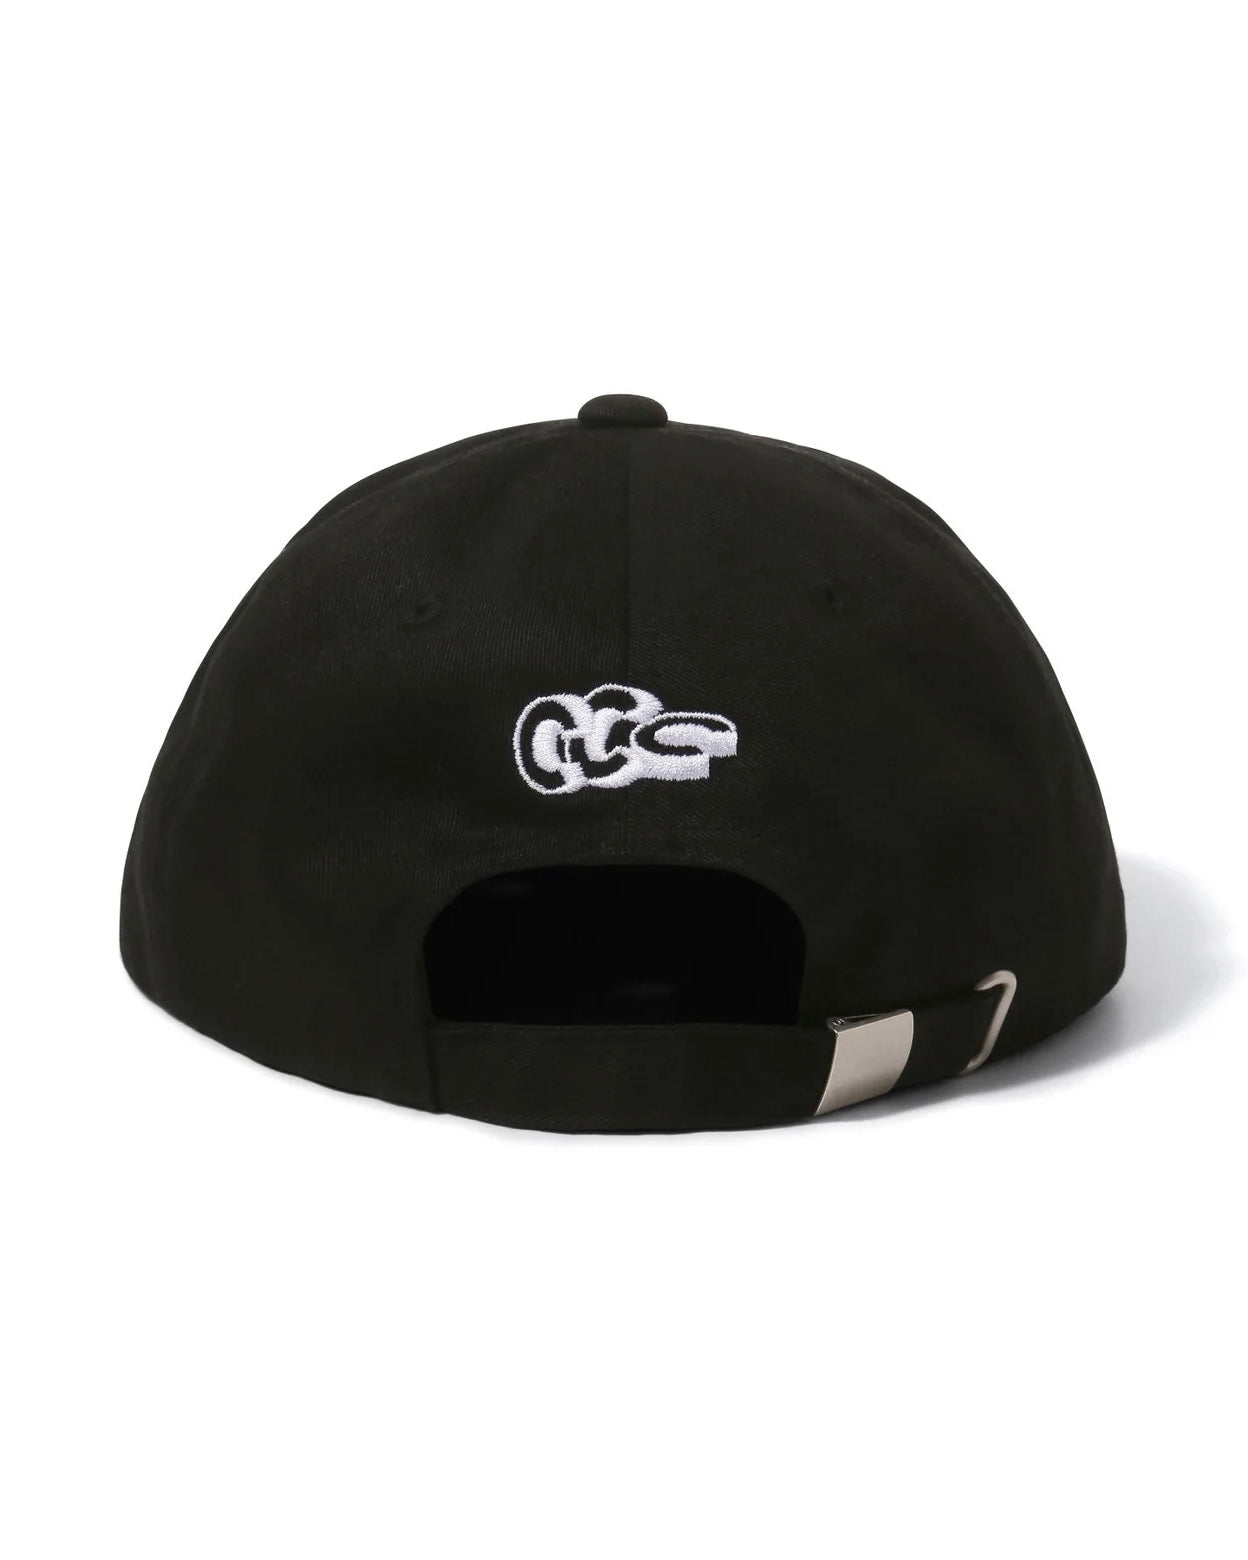 【CITY COUNTRY CITY】EMBROIDERED LOGO COTTON CAP - BLACK